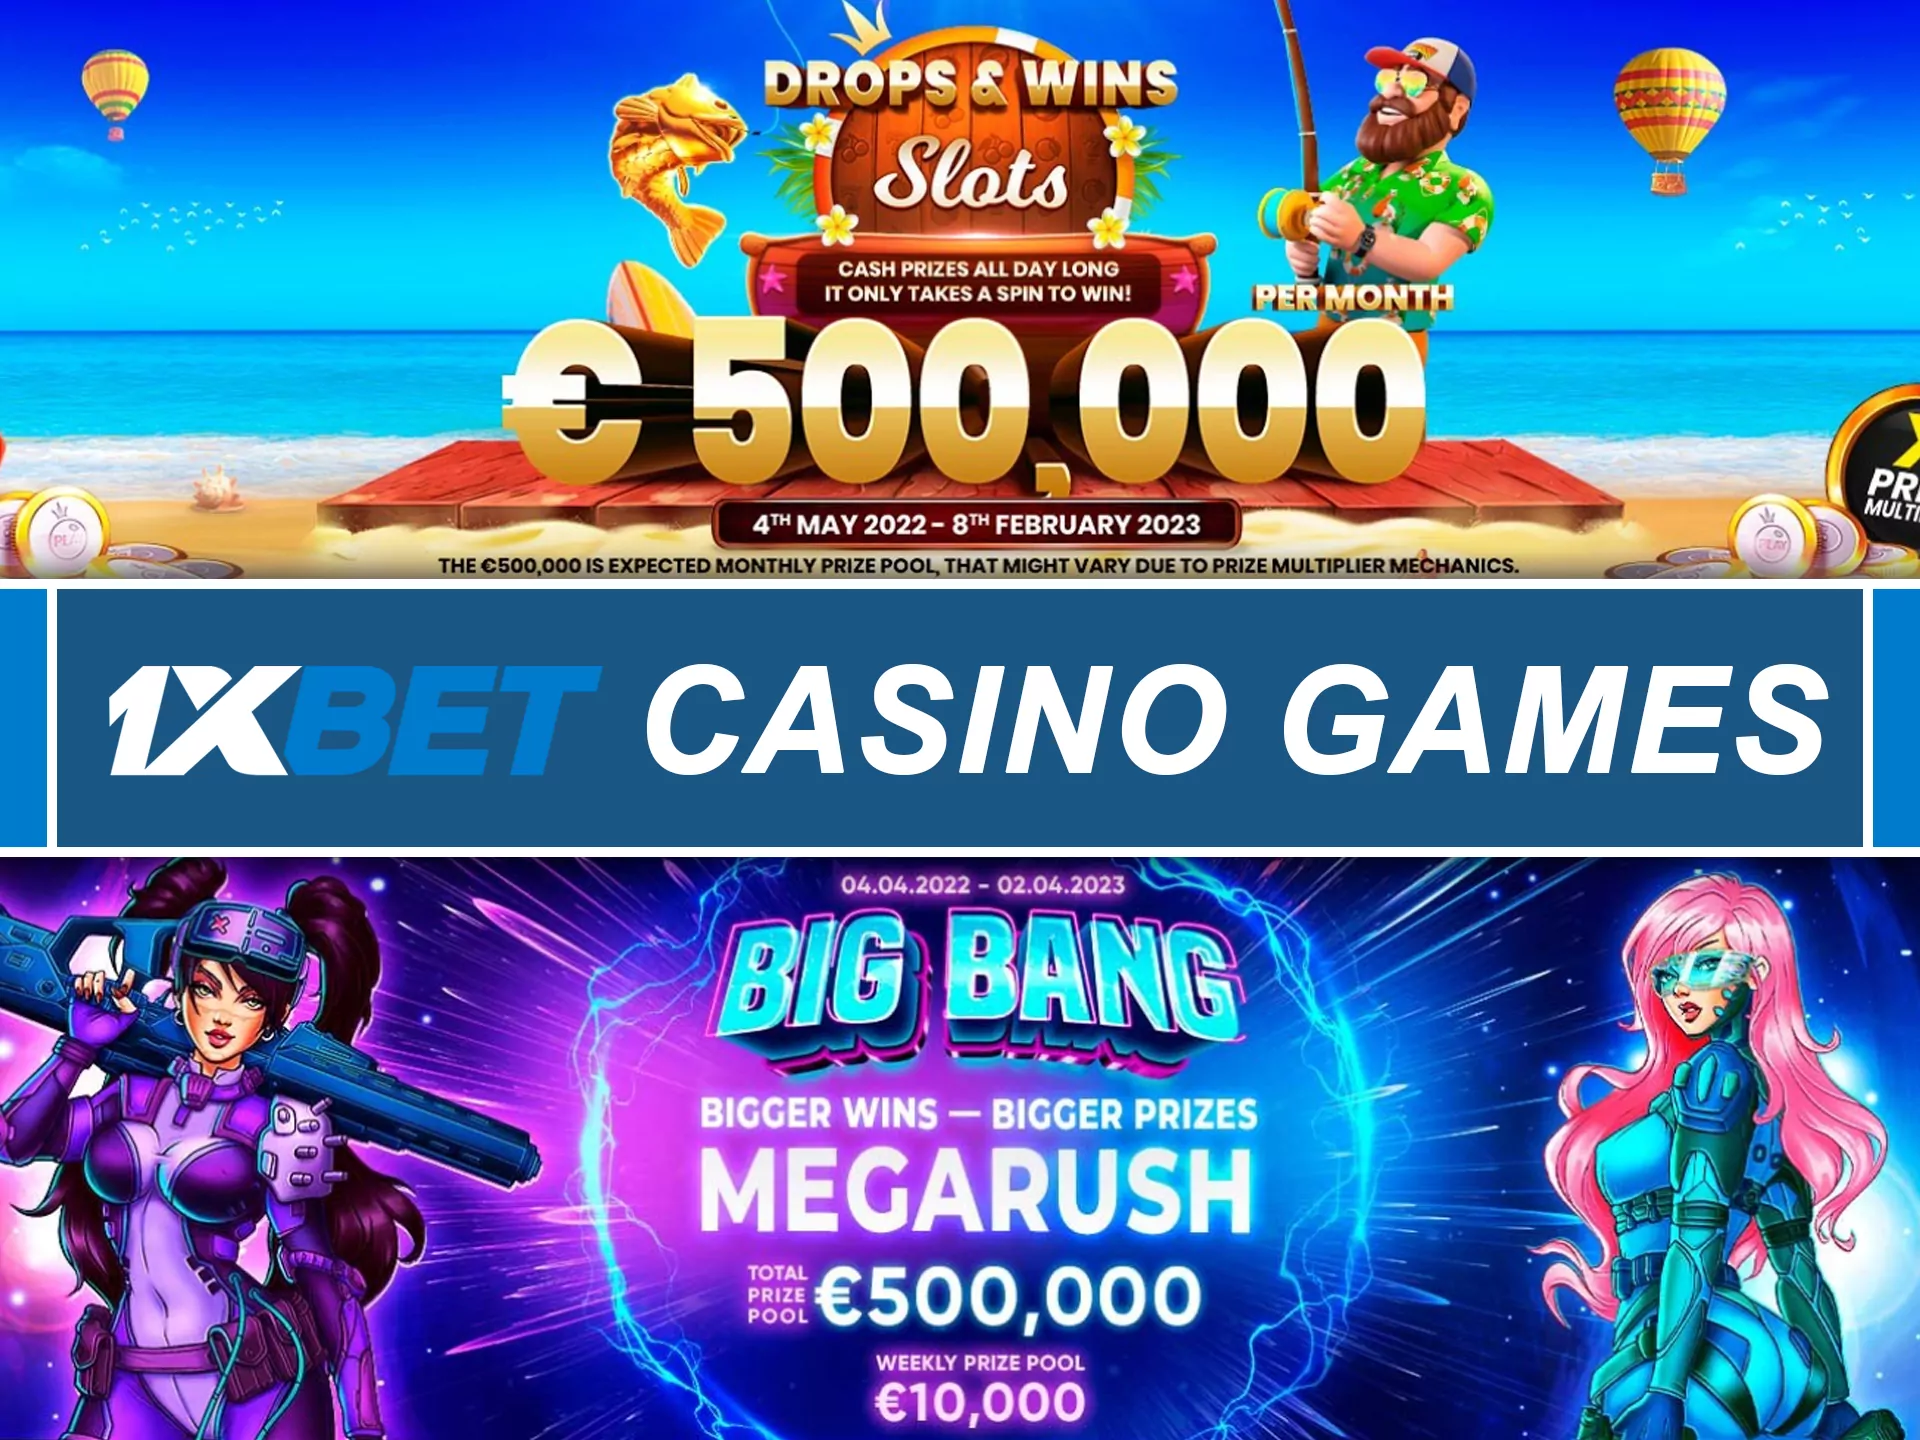 Win big prizes at 1xbet casino games.